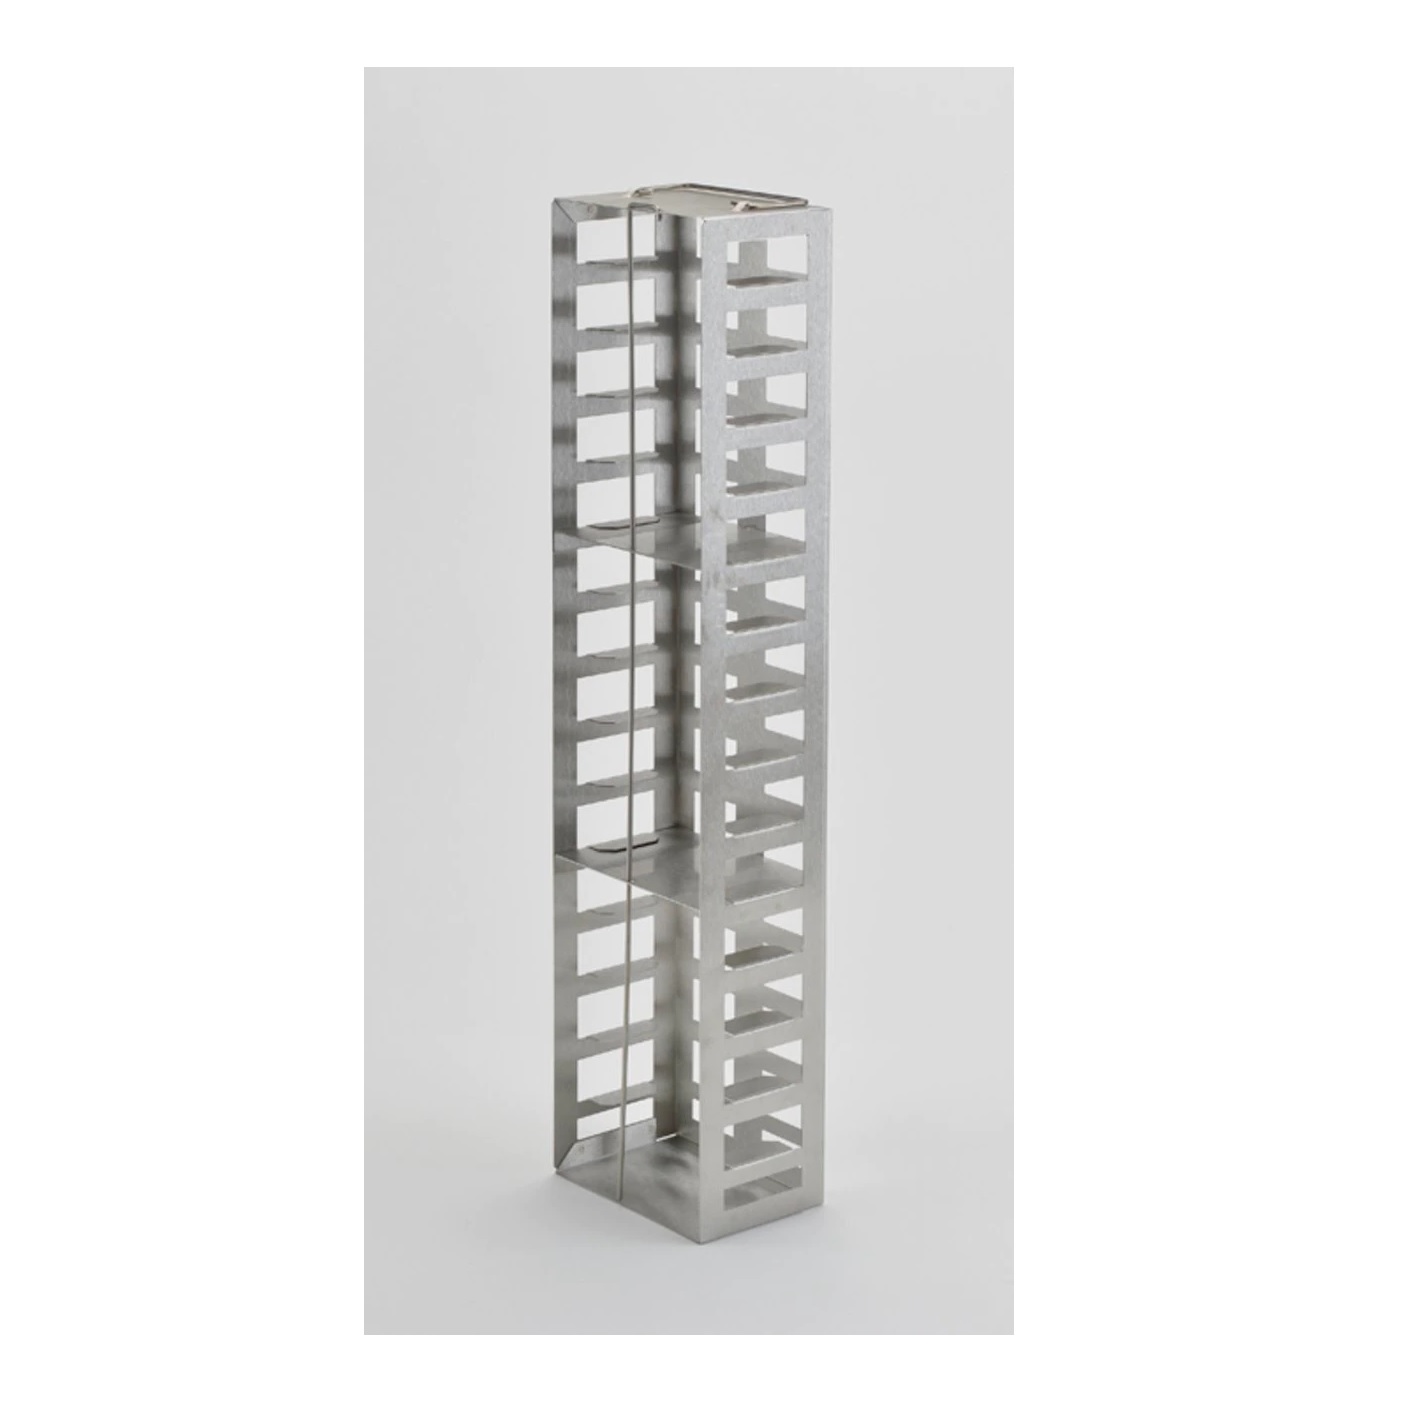 Thermo Scientific™ Dense Storage, Holds Plates (10/Rack), For CryoPlus 1, 2, 3, 4 and Mechanical Cryogenic Chest Freezer